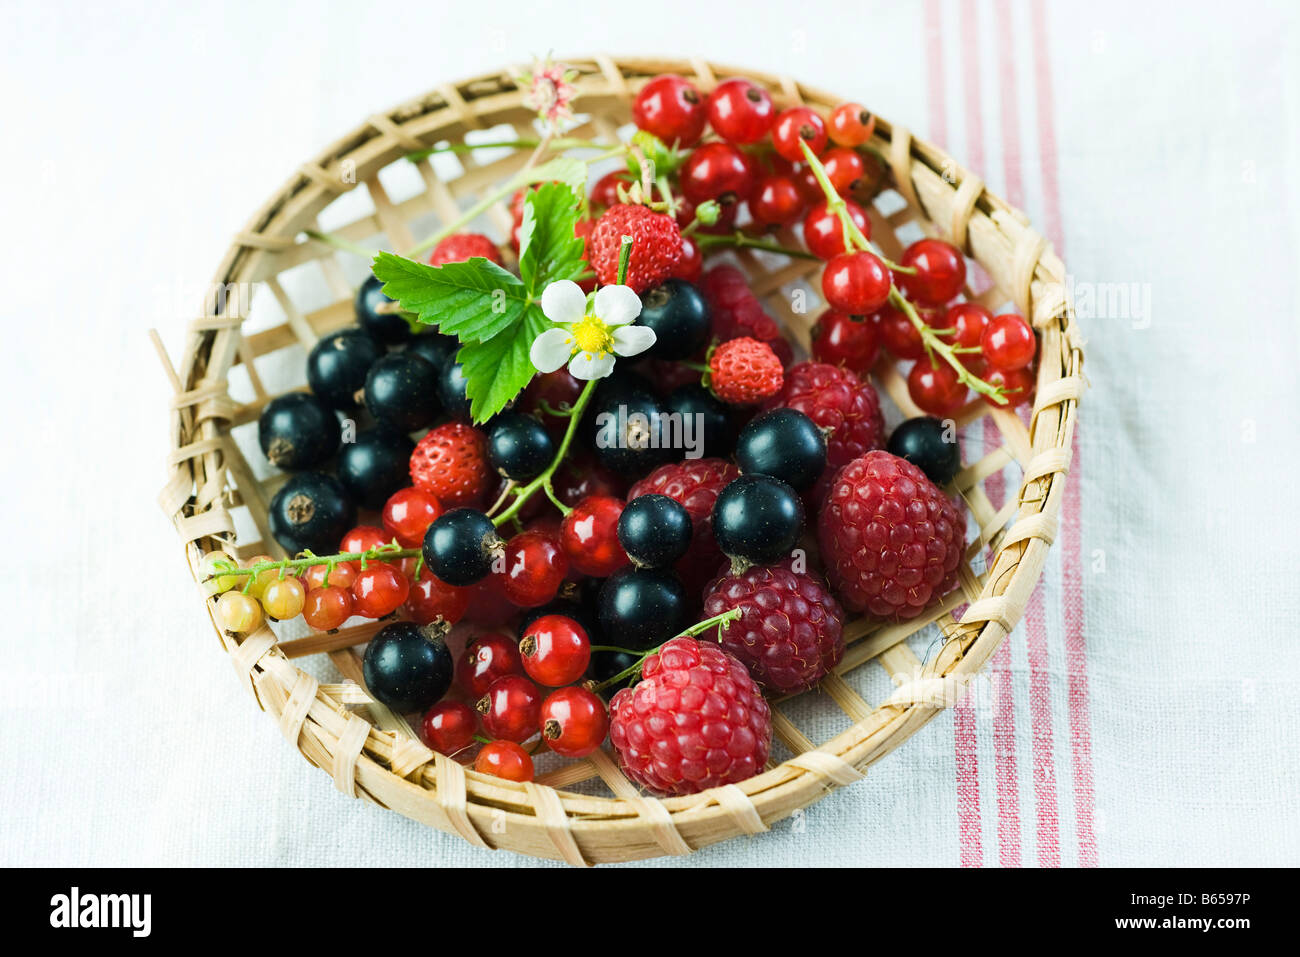 Variety of berries in wooden basket Stock Photo